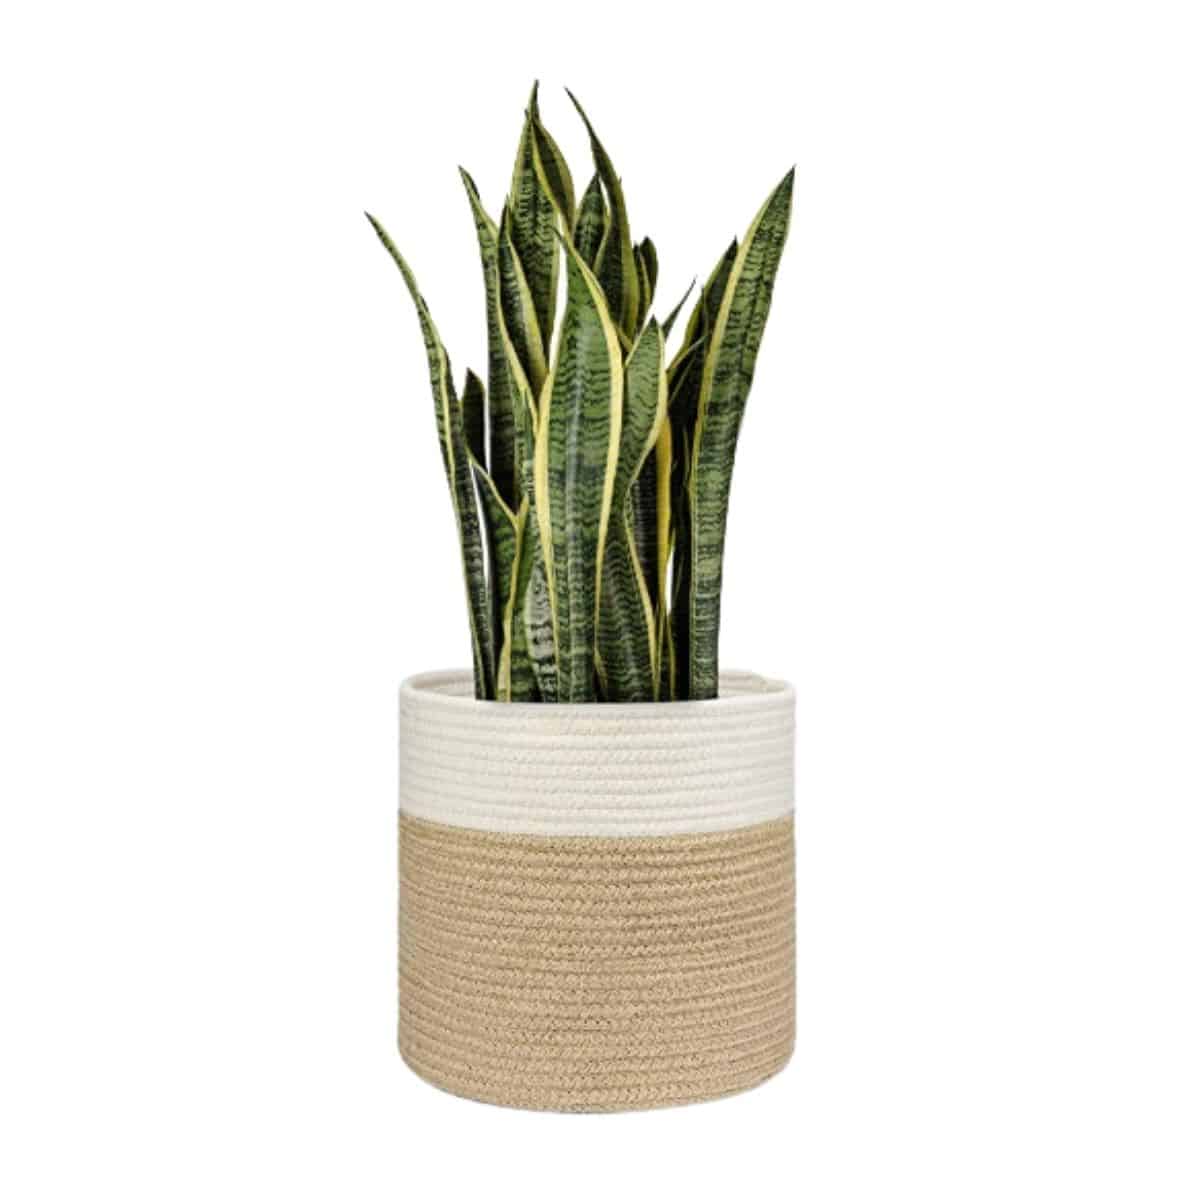 Jute Rope Plant basket in white and tan from Amazon. 